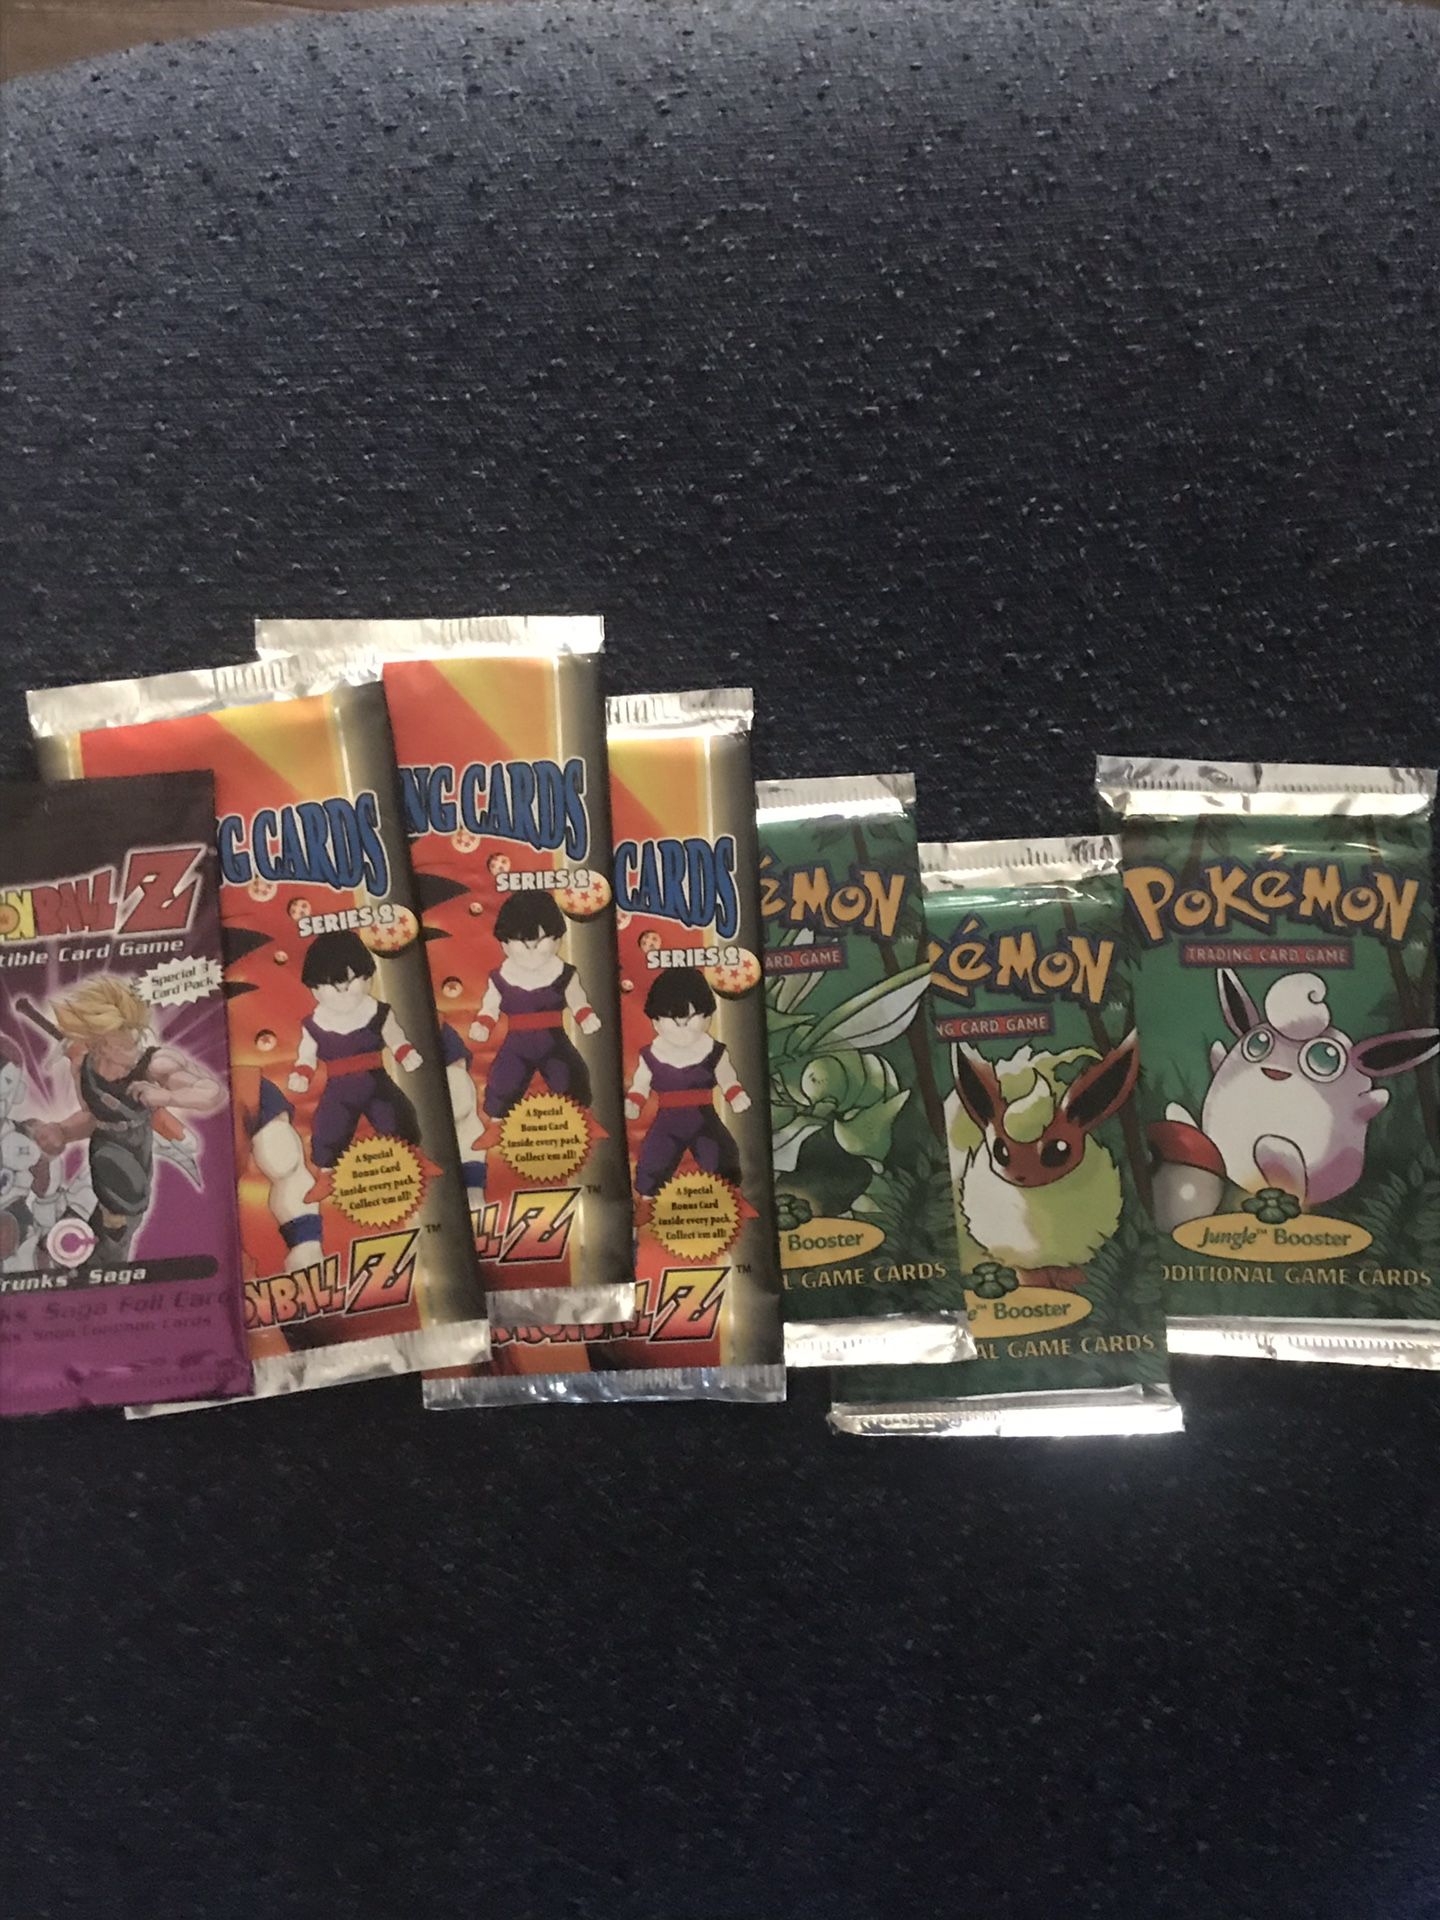 Unopened dragonball z and Pokémon cards